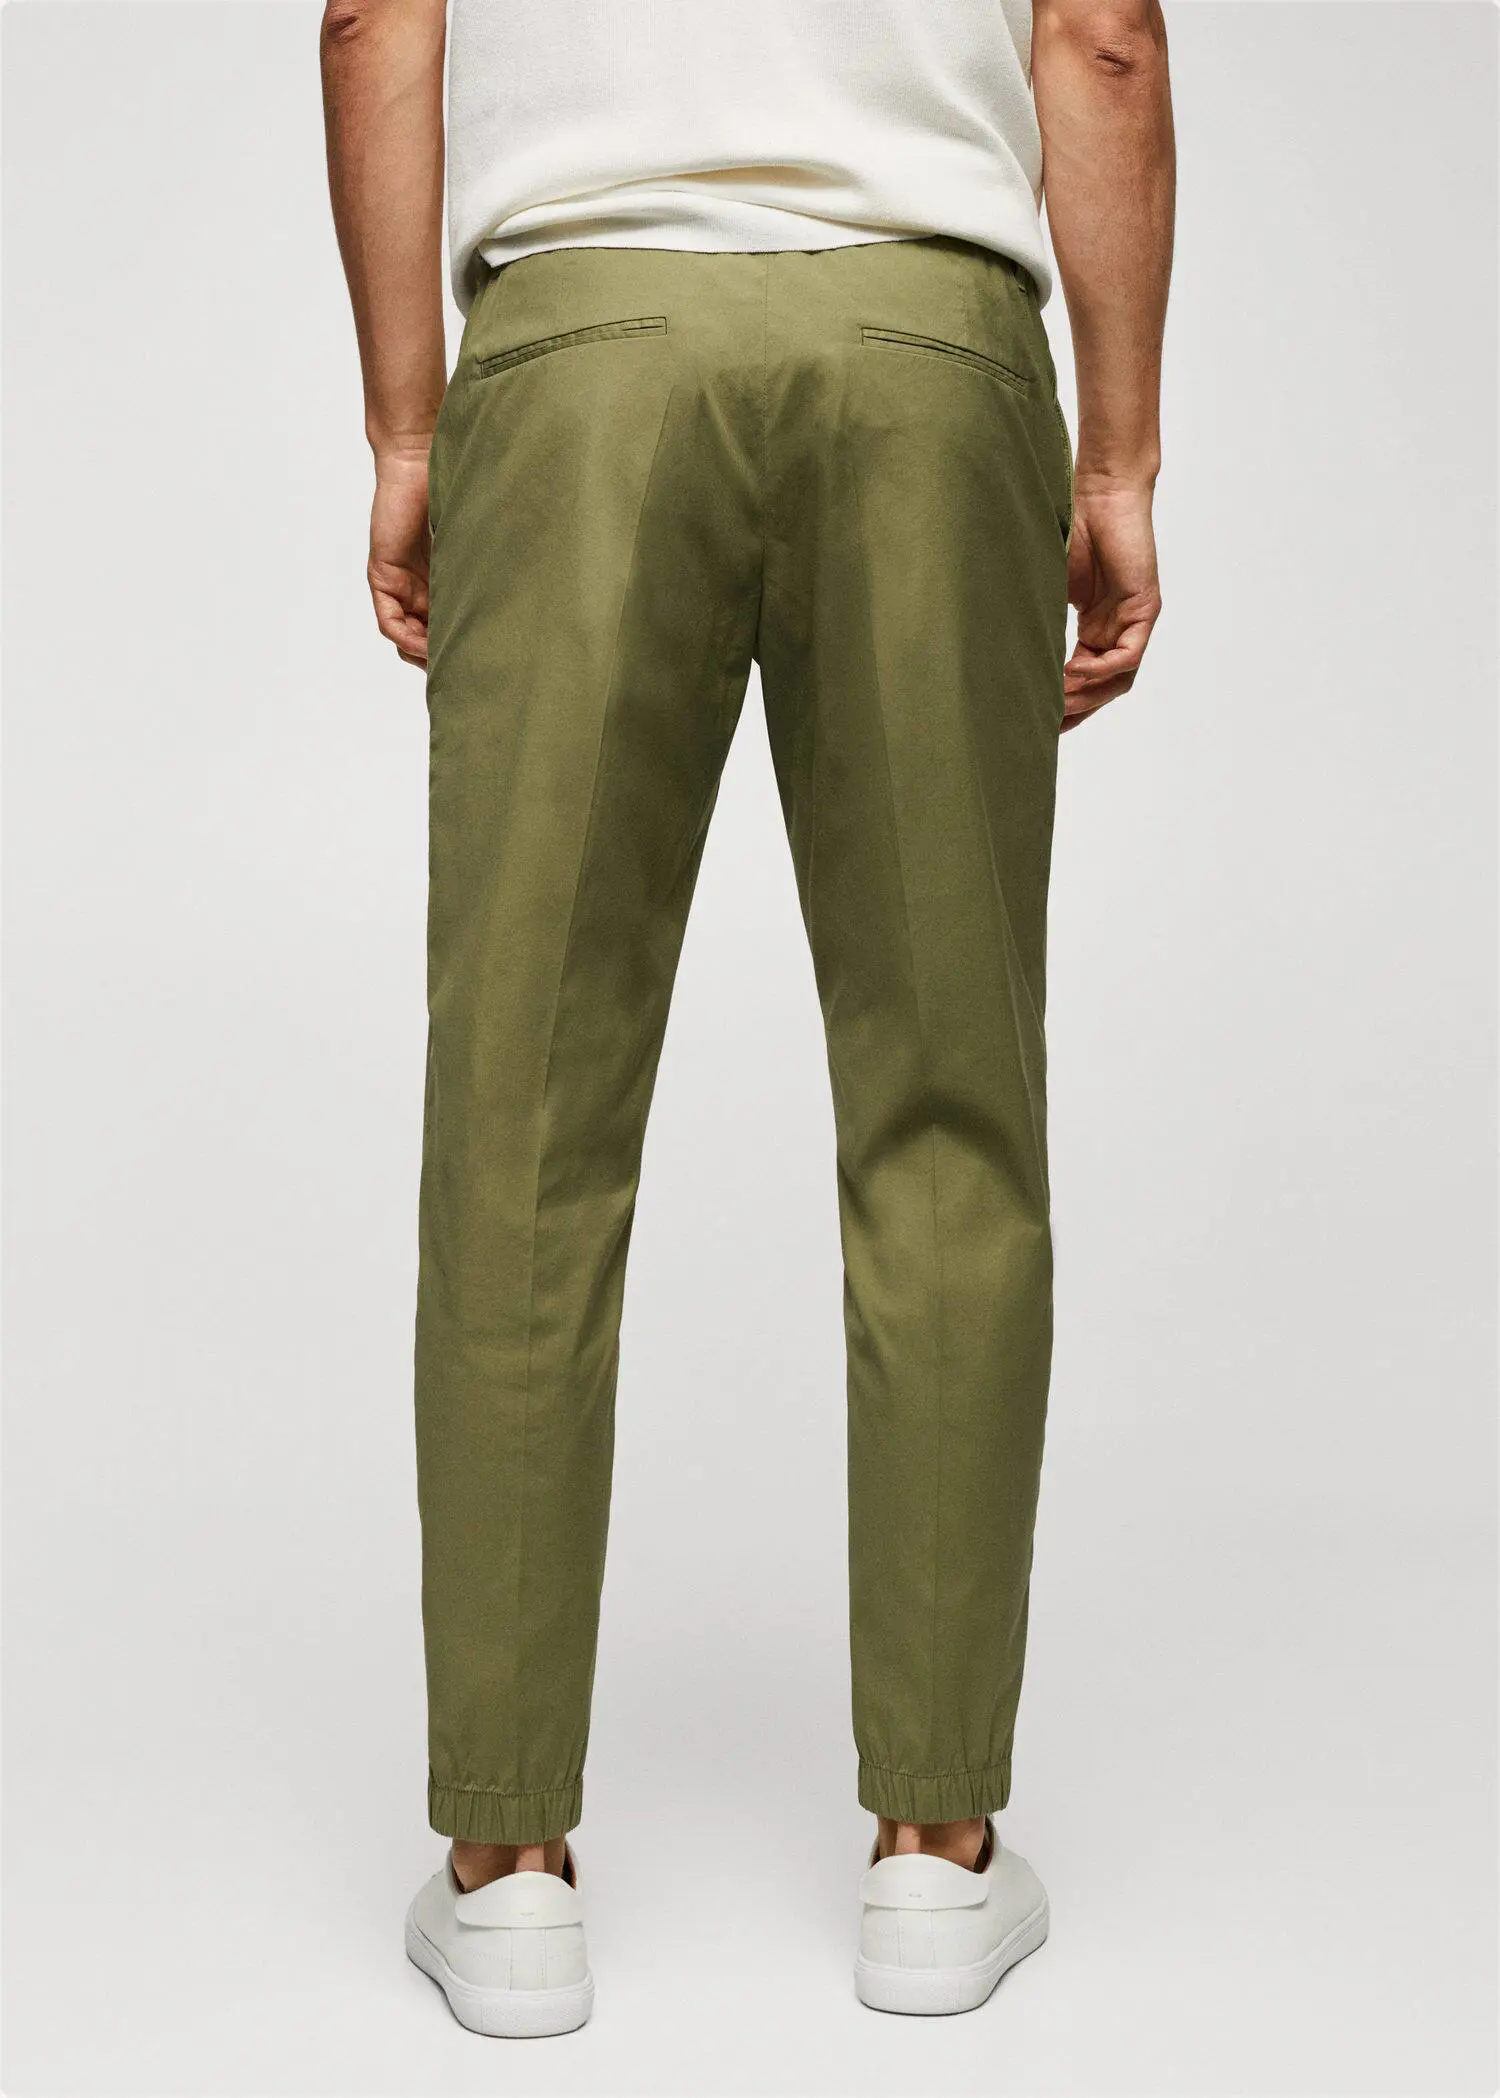 Mango Slim-fit cotton trousers. a person wearing a pair of green pants. 